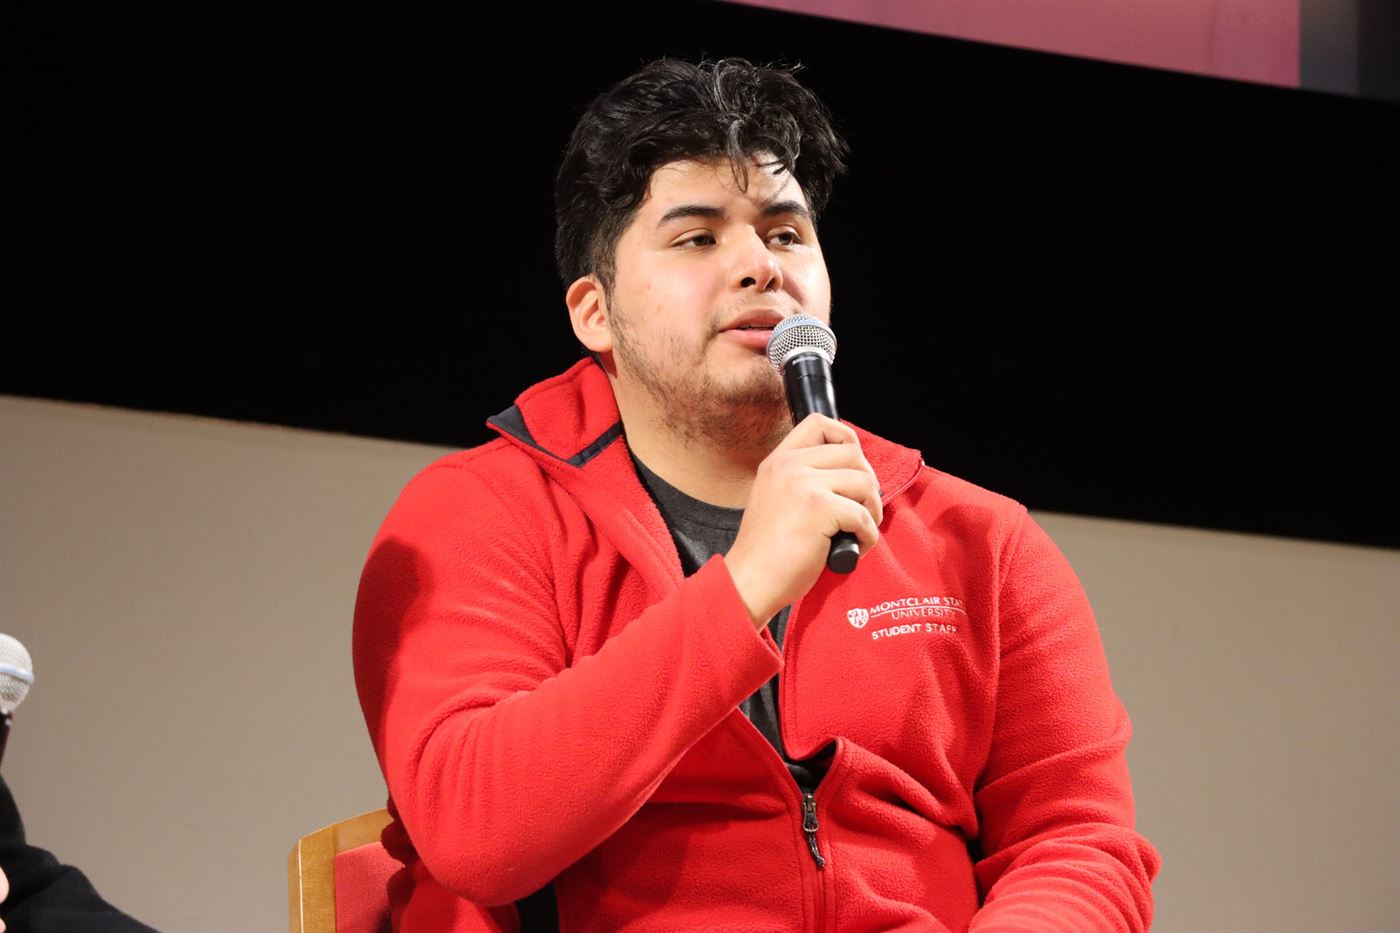 Hunter Ayala, junior business administration major, talks about how his segment "The Lantinx Experience" highlights the diversity of Montclair State and his journey as a first-generation college student.